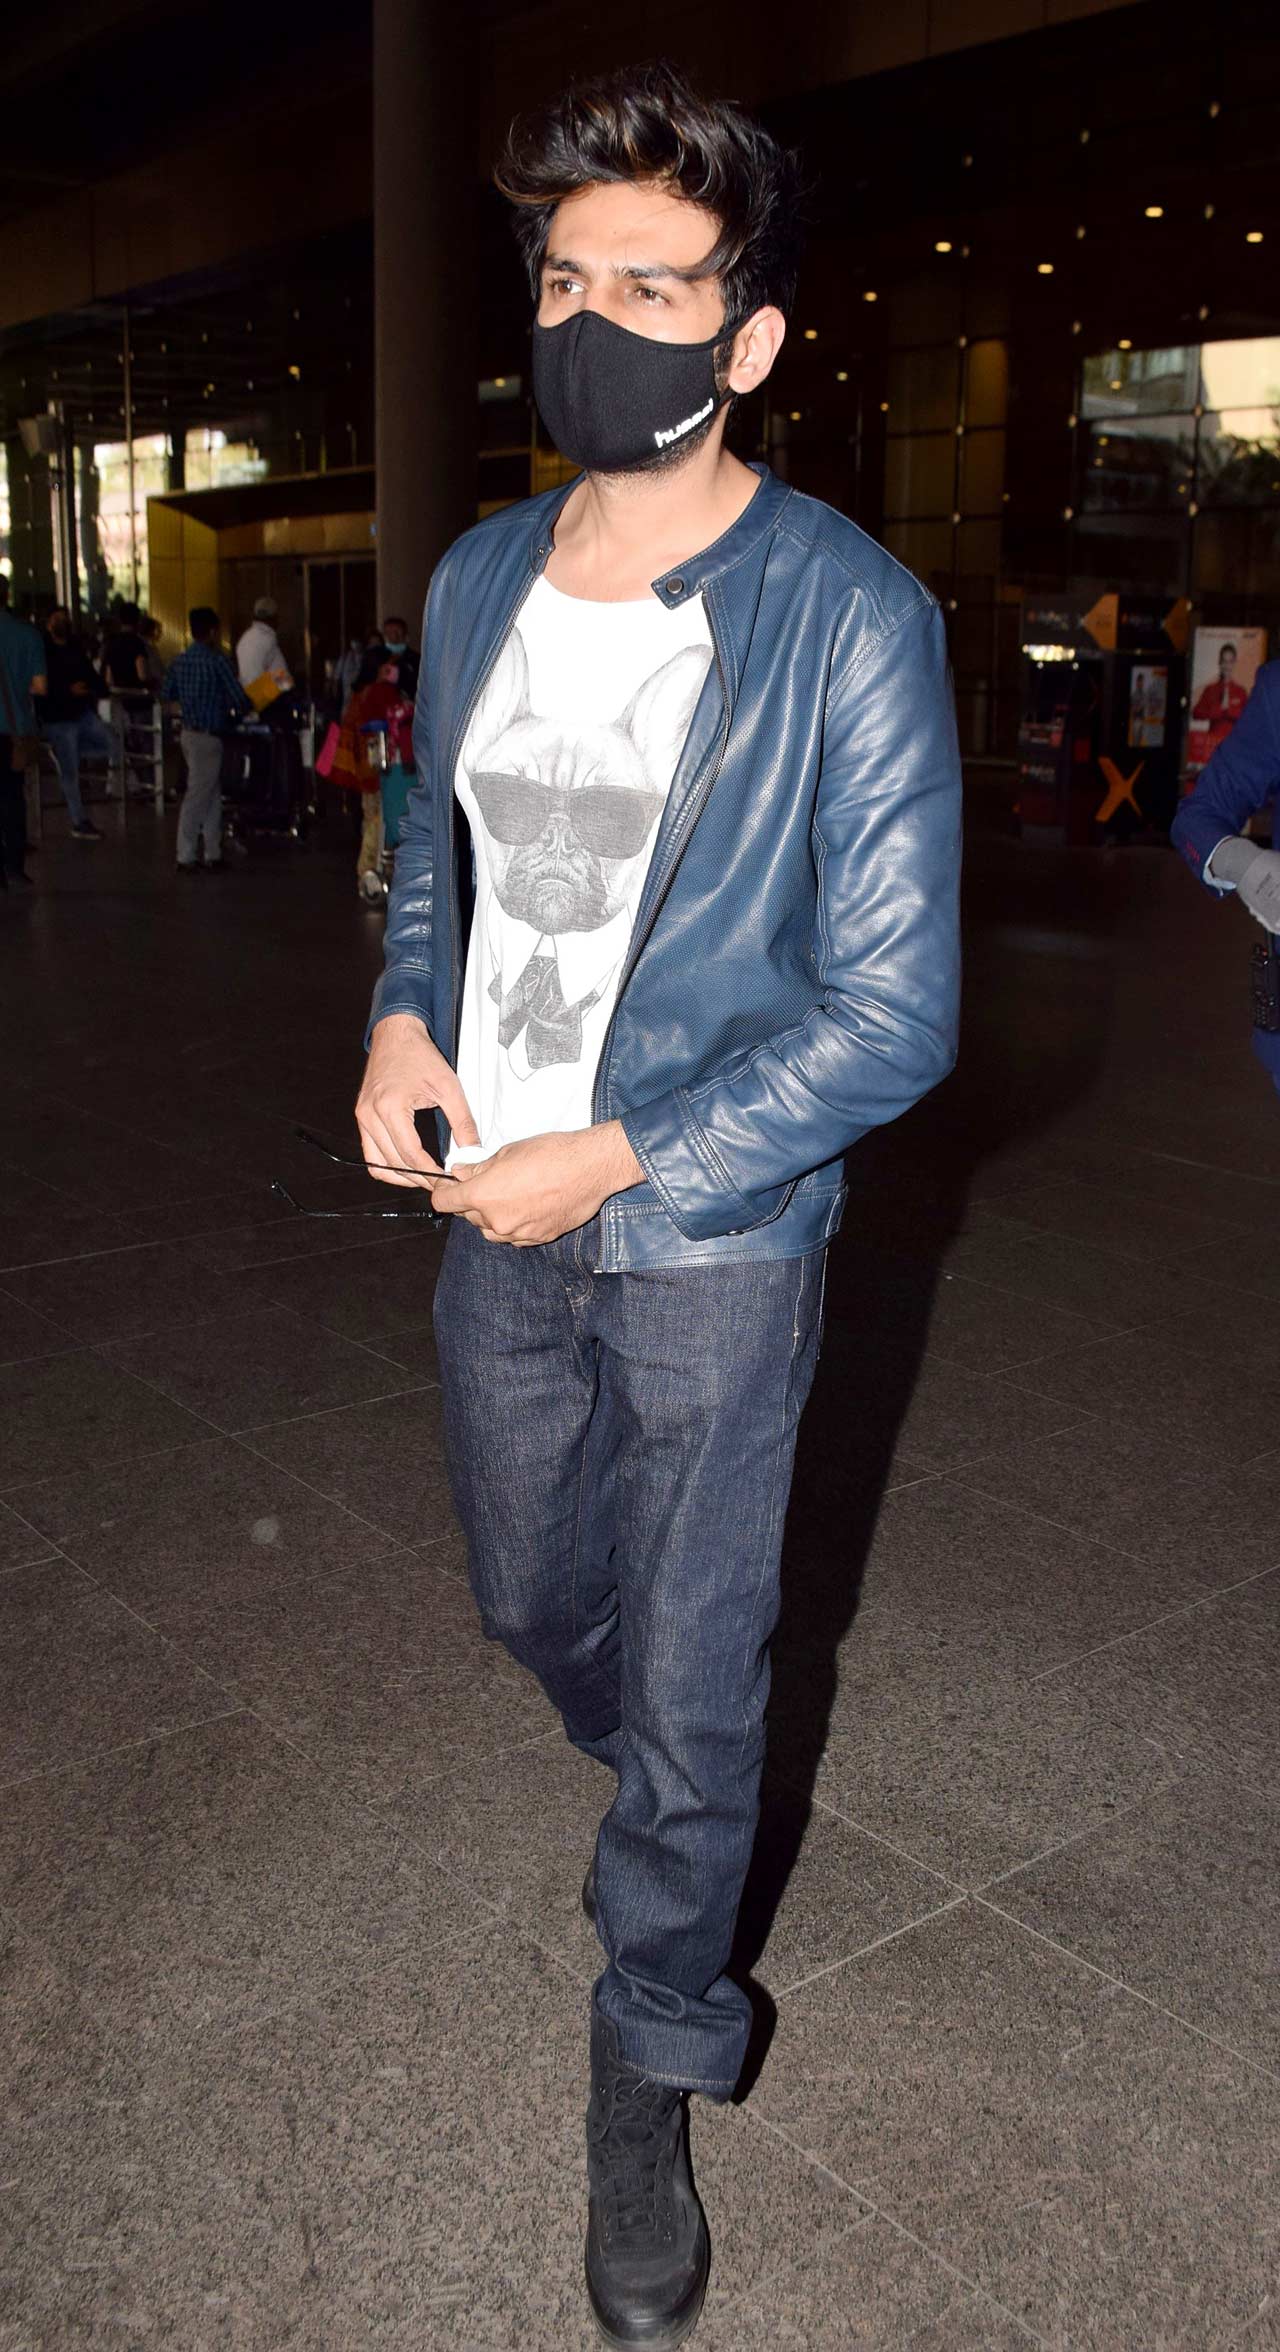 Kartik Aaryan, who released the teaser of his upcoming film Dhamaka, was also snapped at the airport. Speaking about the film gives an insight into the intense, gritty and solid character of a news anchor Arjun Pathak. Elevating the levels of anticipation, the teaser of Dhamaka offers further insight into the gripping story woven around a news anchor reporting a hard-hitting incident of a bomb-blast in realtime. The actor is already receiving some rave reviews.